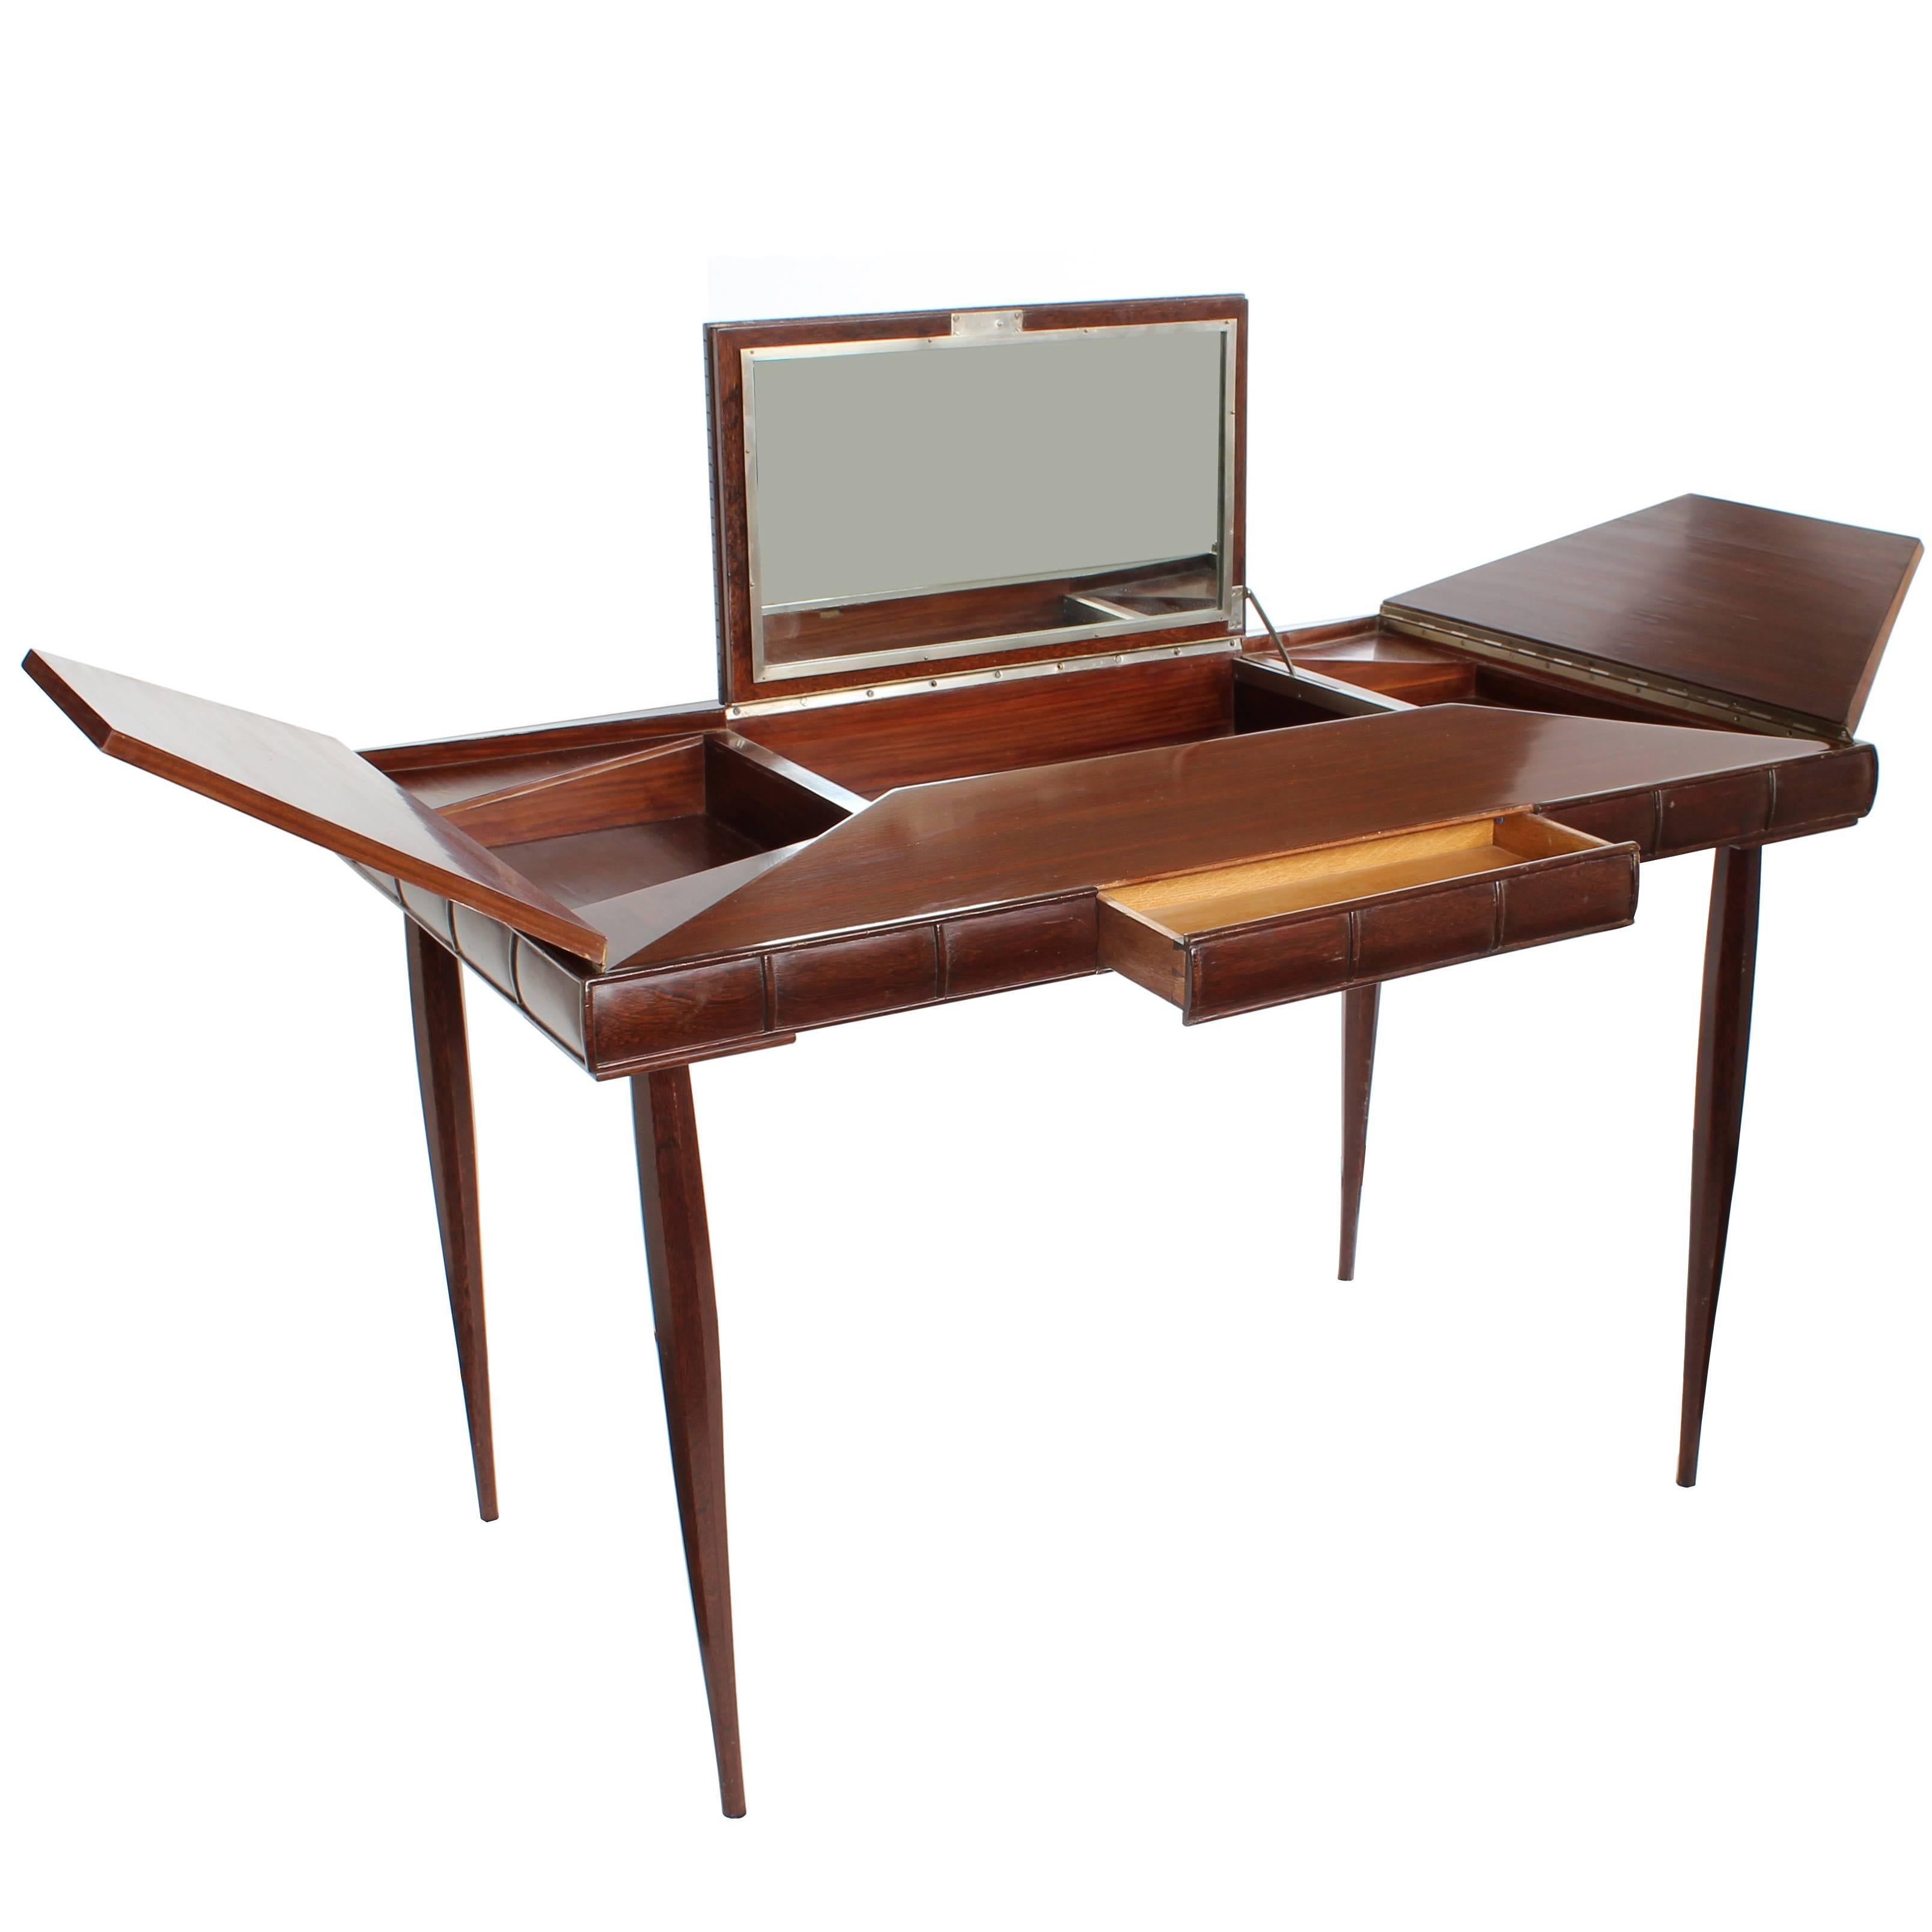 A French art Deco palissandre (rosewood) and palm wood envelope-style vanity with center fold up mirror, drawer and two-fold up side compartments, circa 1940.

Architect, Sandy Littman of Duesenberg LTD.  and The American Glass Light Company have